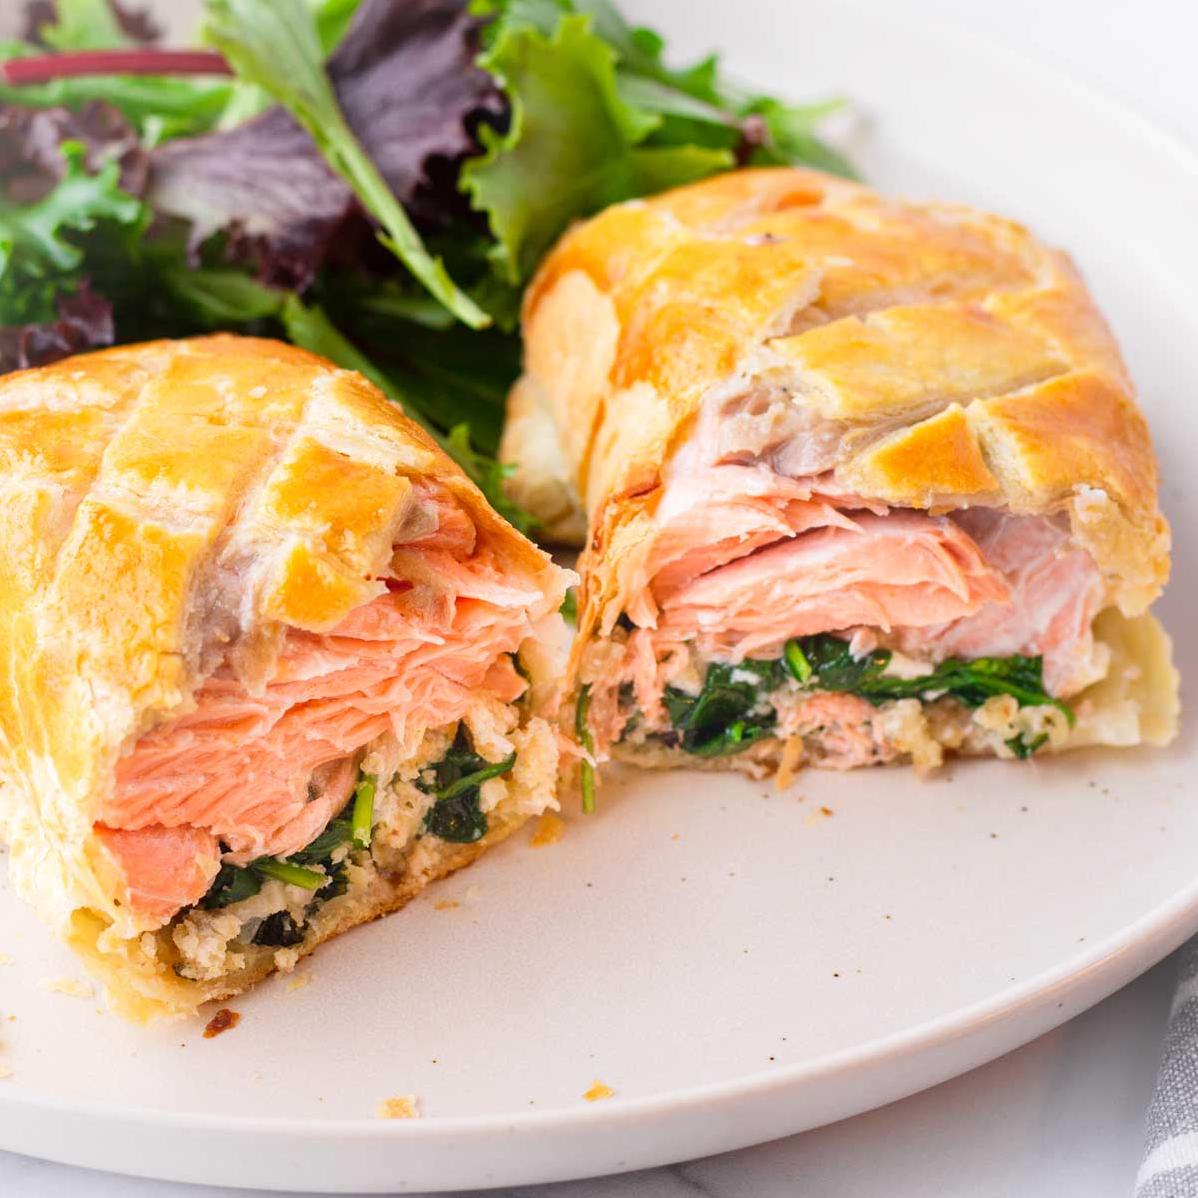  Smelling the aroma of baked salmon is heavenly.